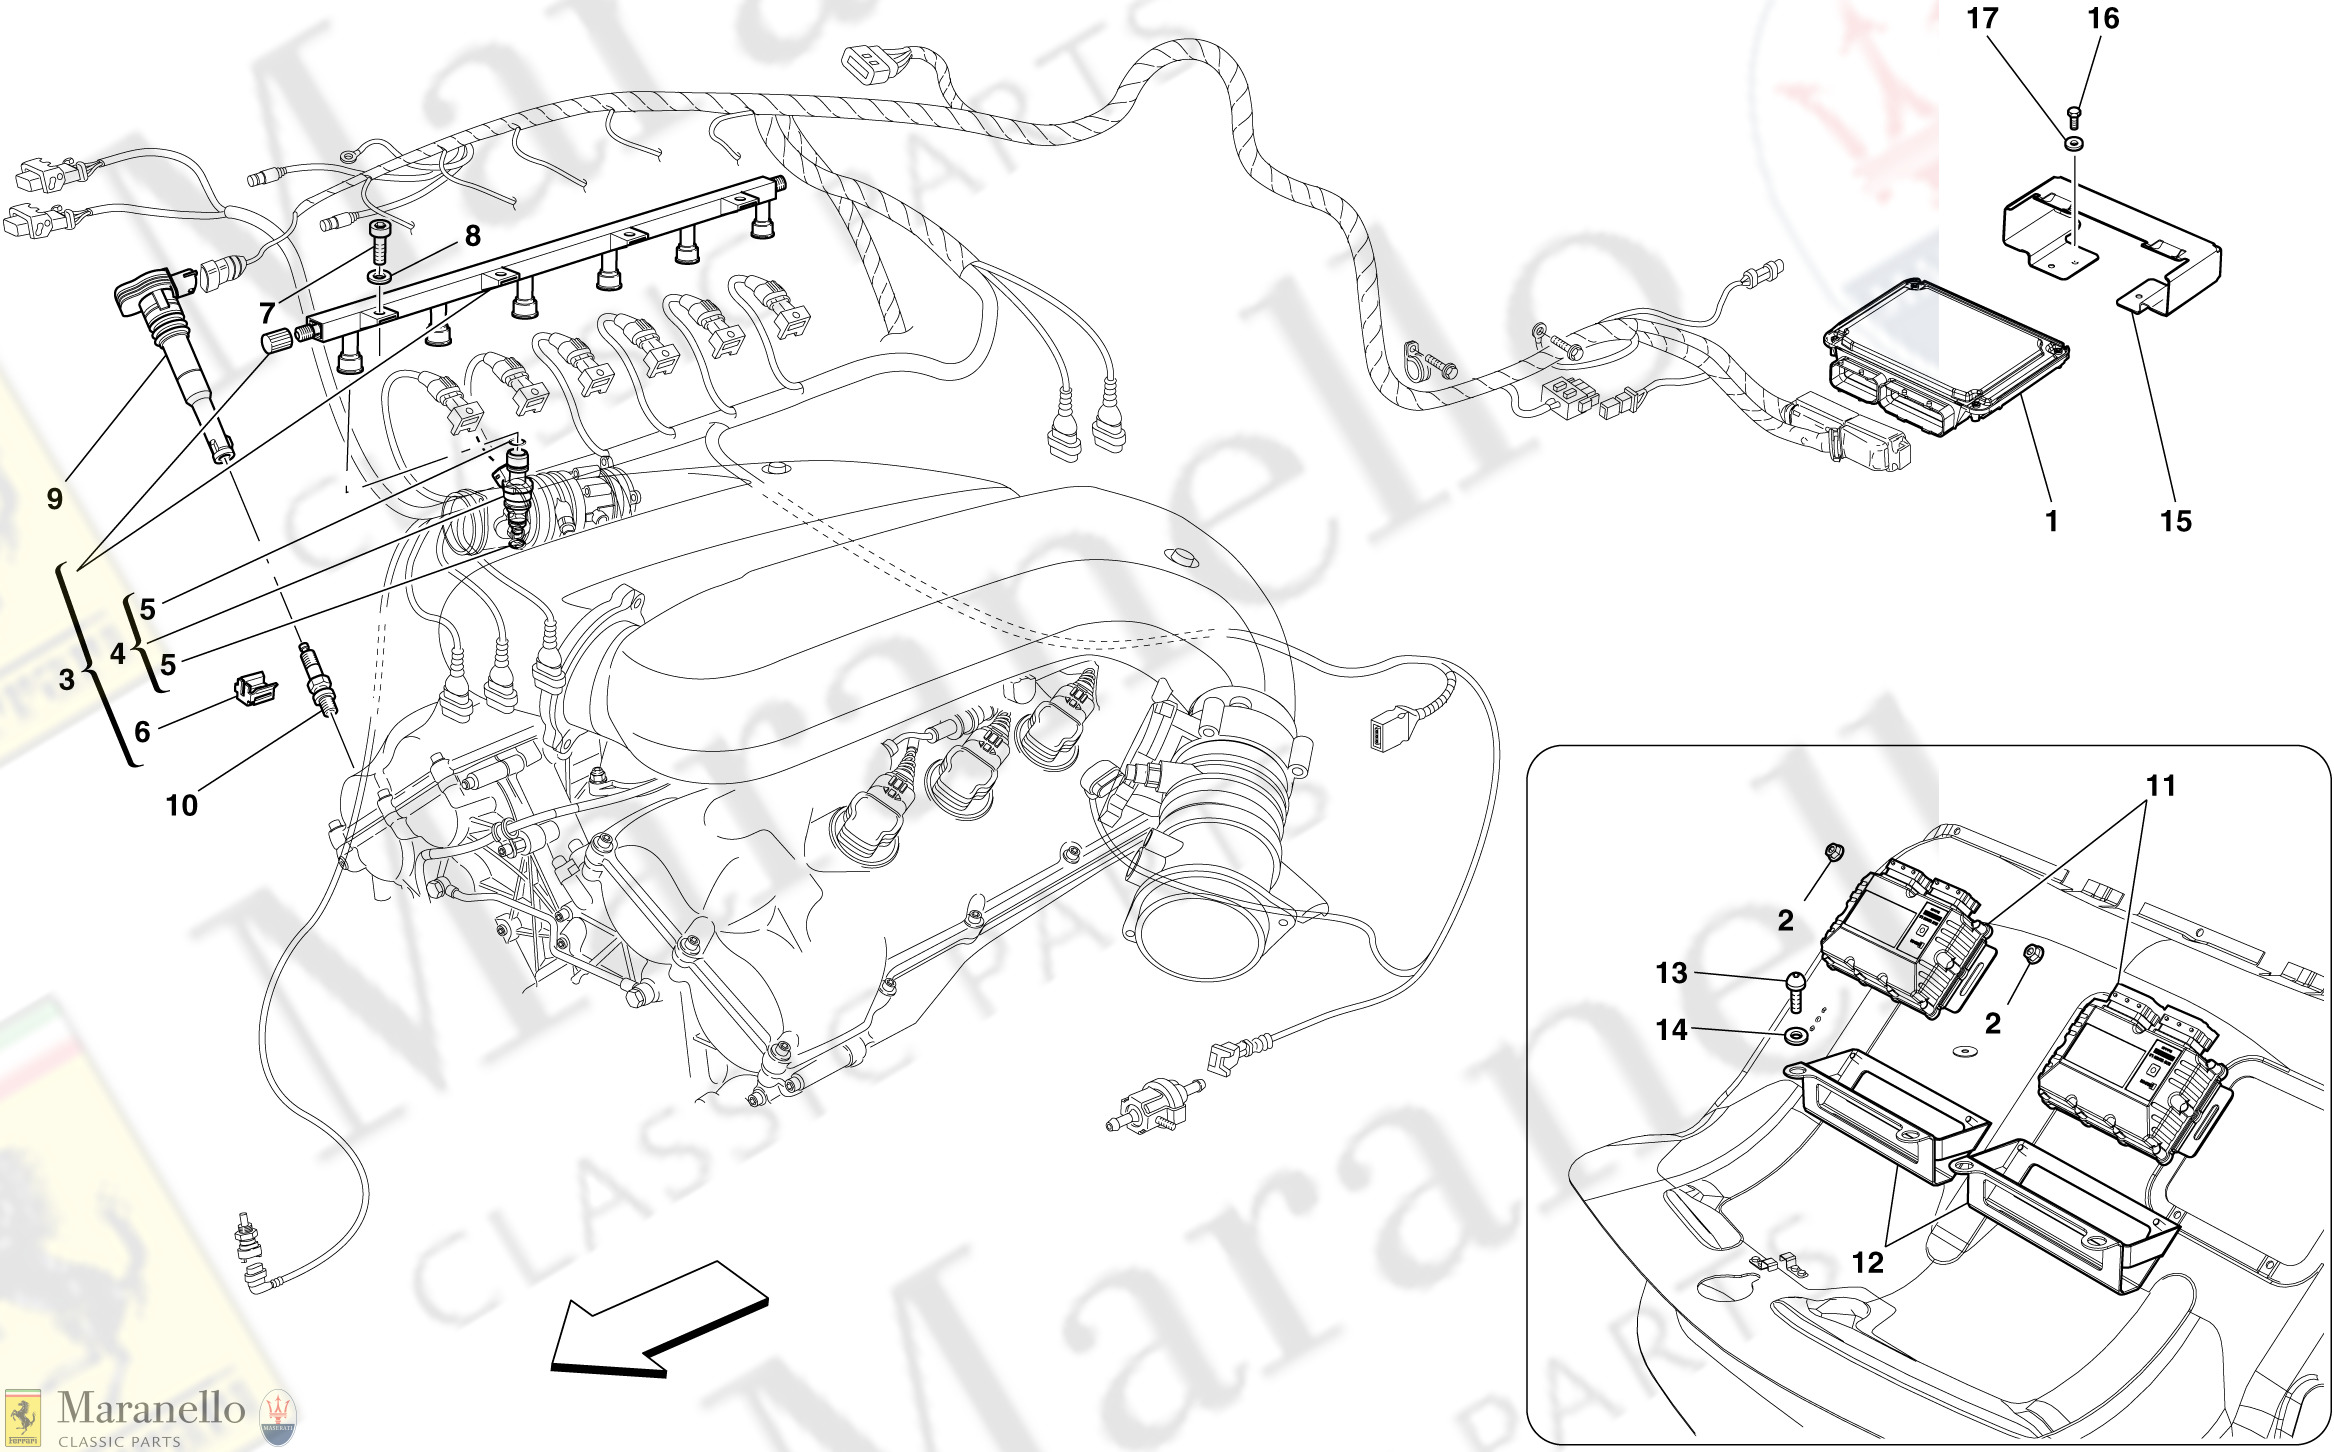 012 - Injection - Ignition System